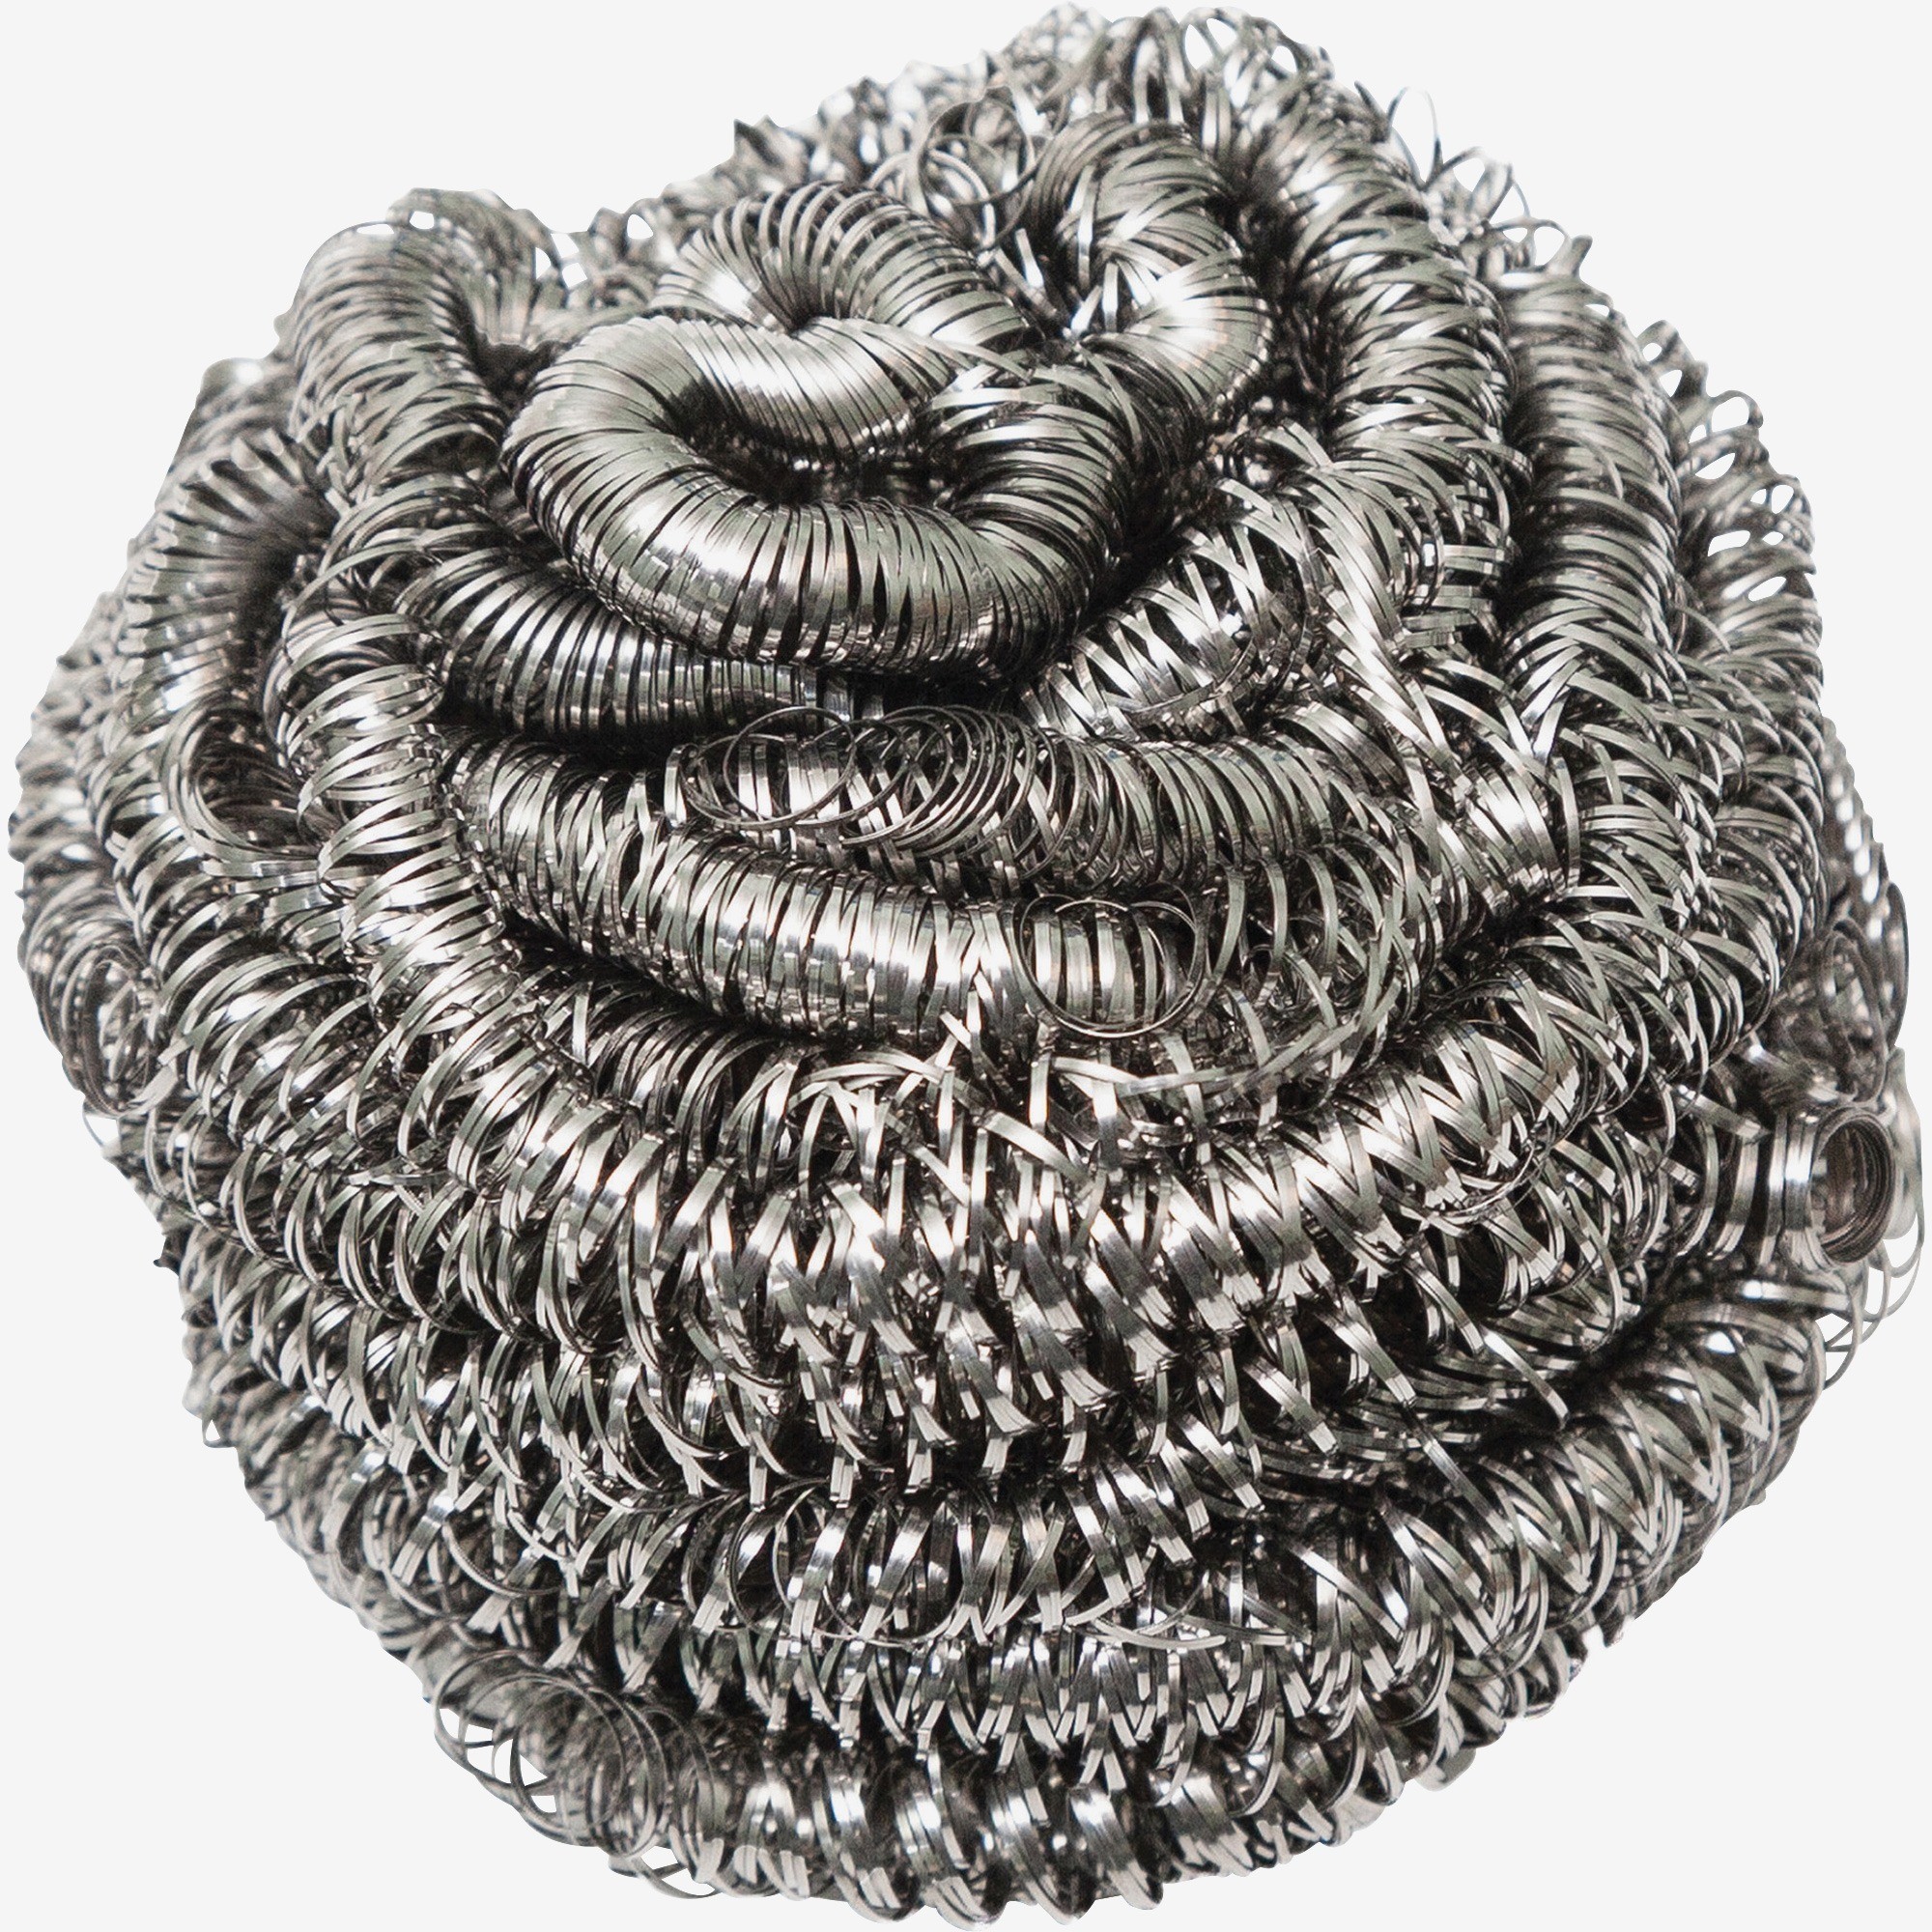 Wholesale Stainless Steel Scourers by Scrub It – Steel Wool Scrubber Pad Used for Dishes, Pots, Pans, and Ovens. from china suppliers